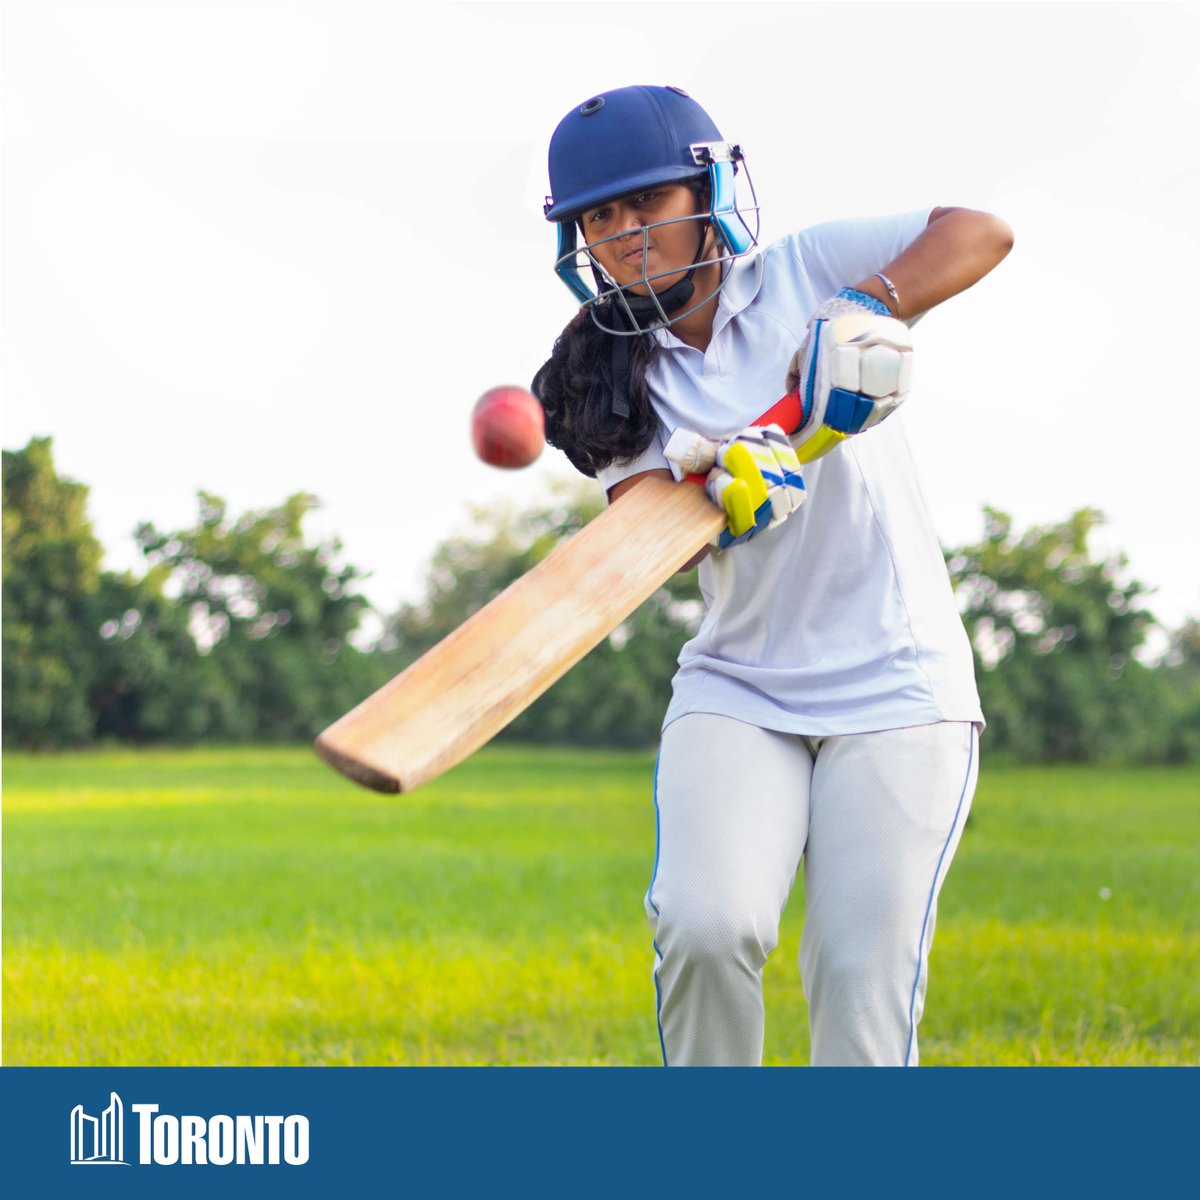 Calling all cricketers! Take a short online survey to help shape the City’s first Cricket Strategy: toronto.ca/city-governmen…